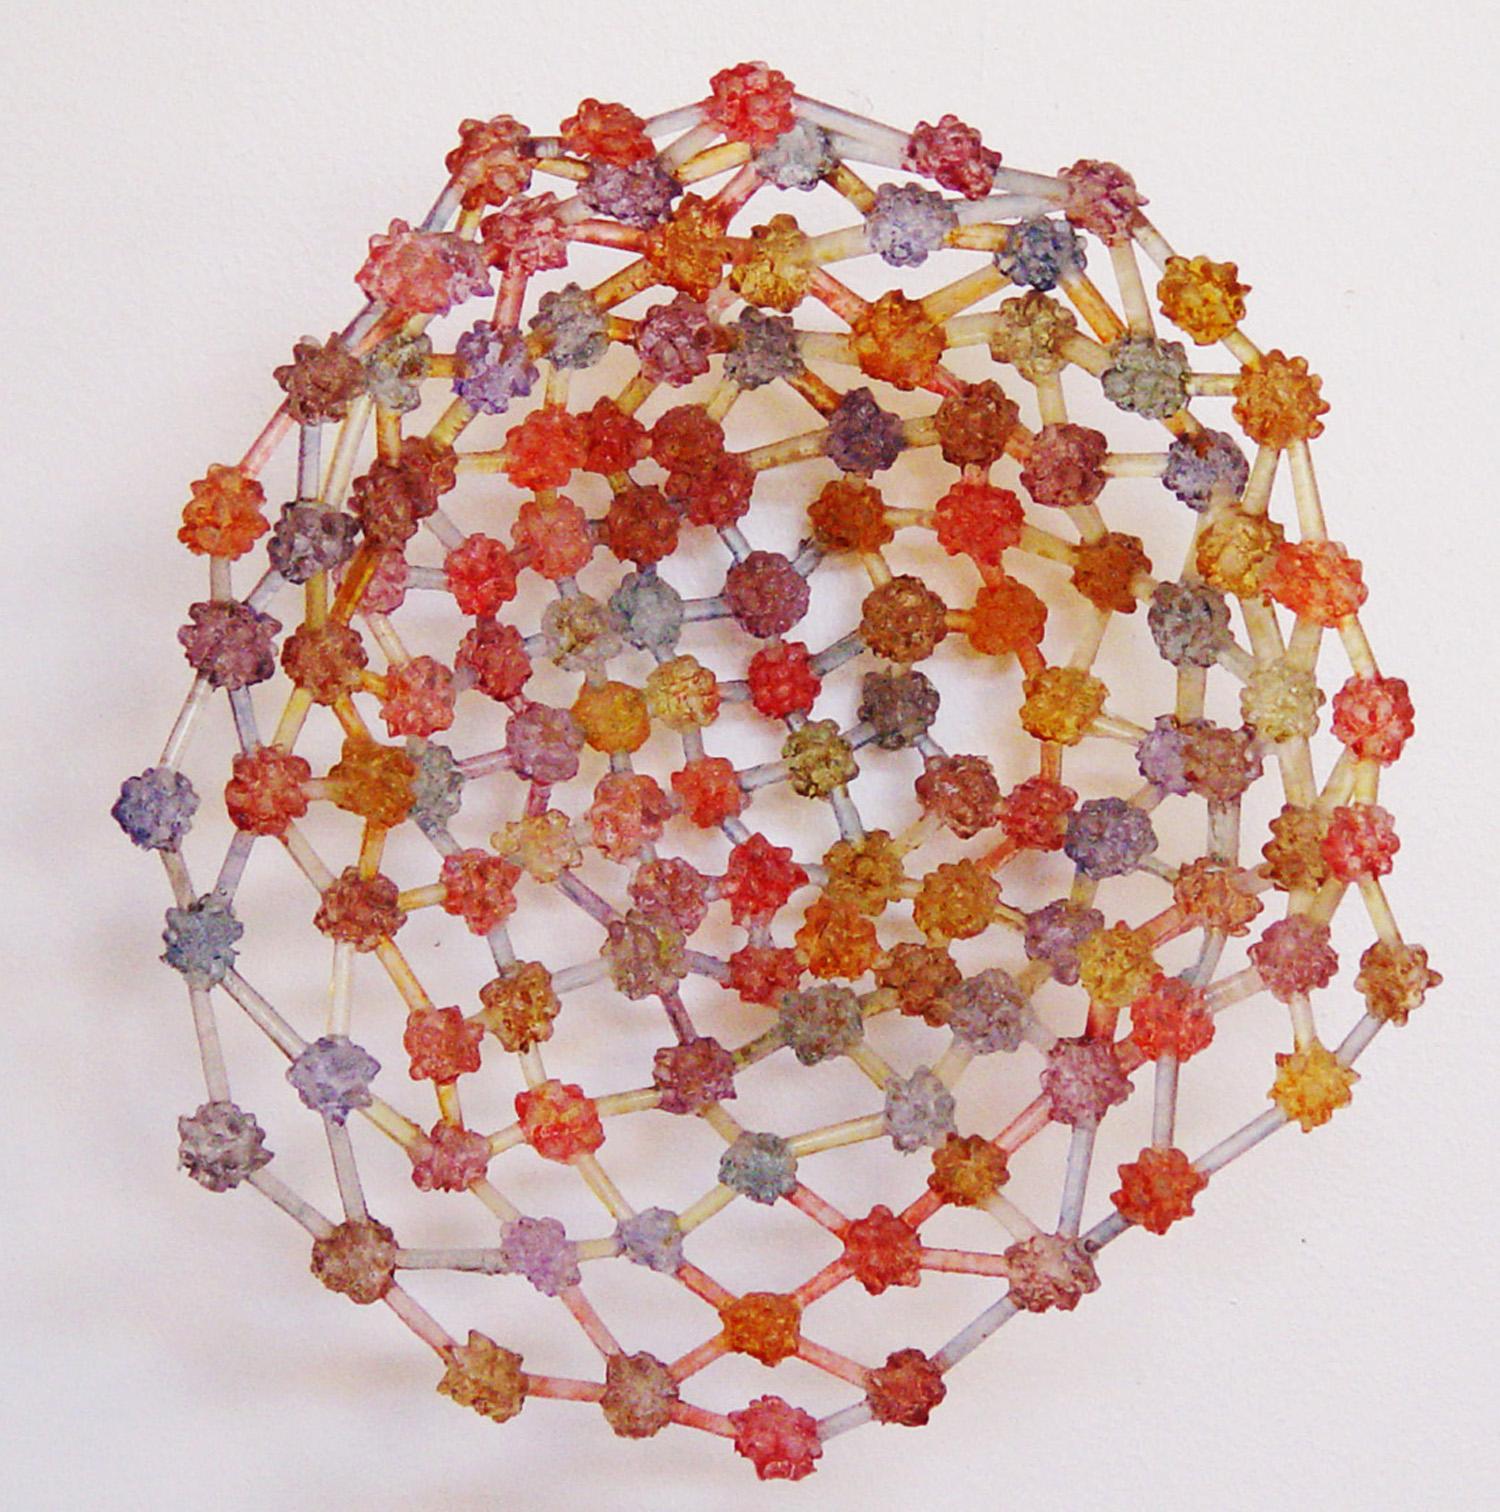 Howard Kalish Abstract Sculpture - "Basket"  cradles translucent red, yellow and blue blossom clusters